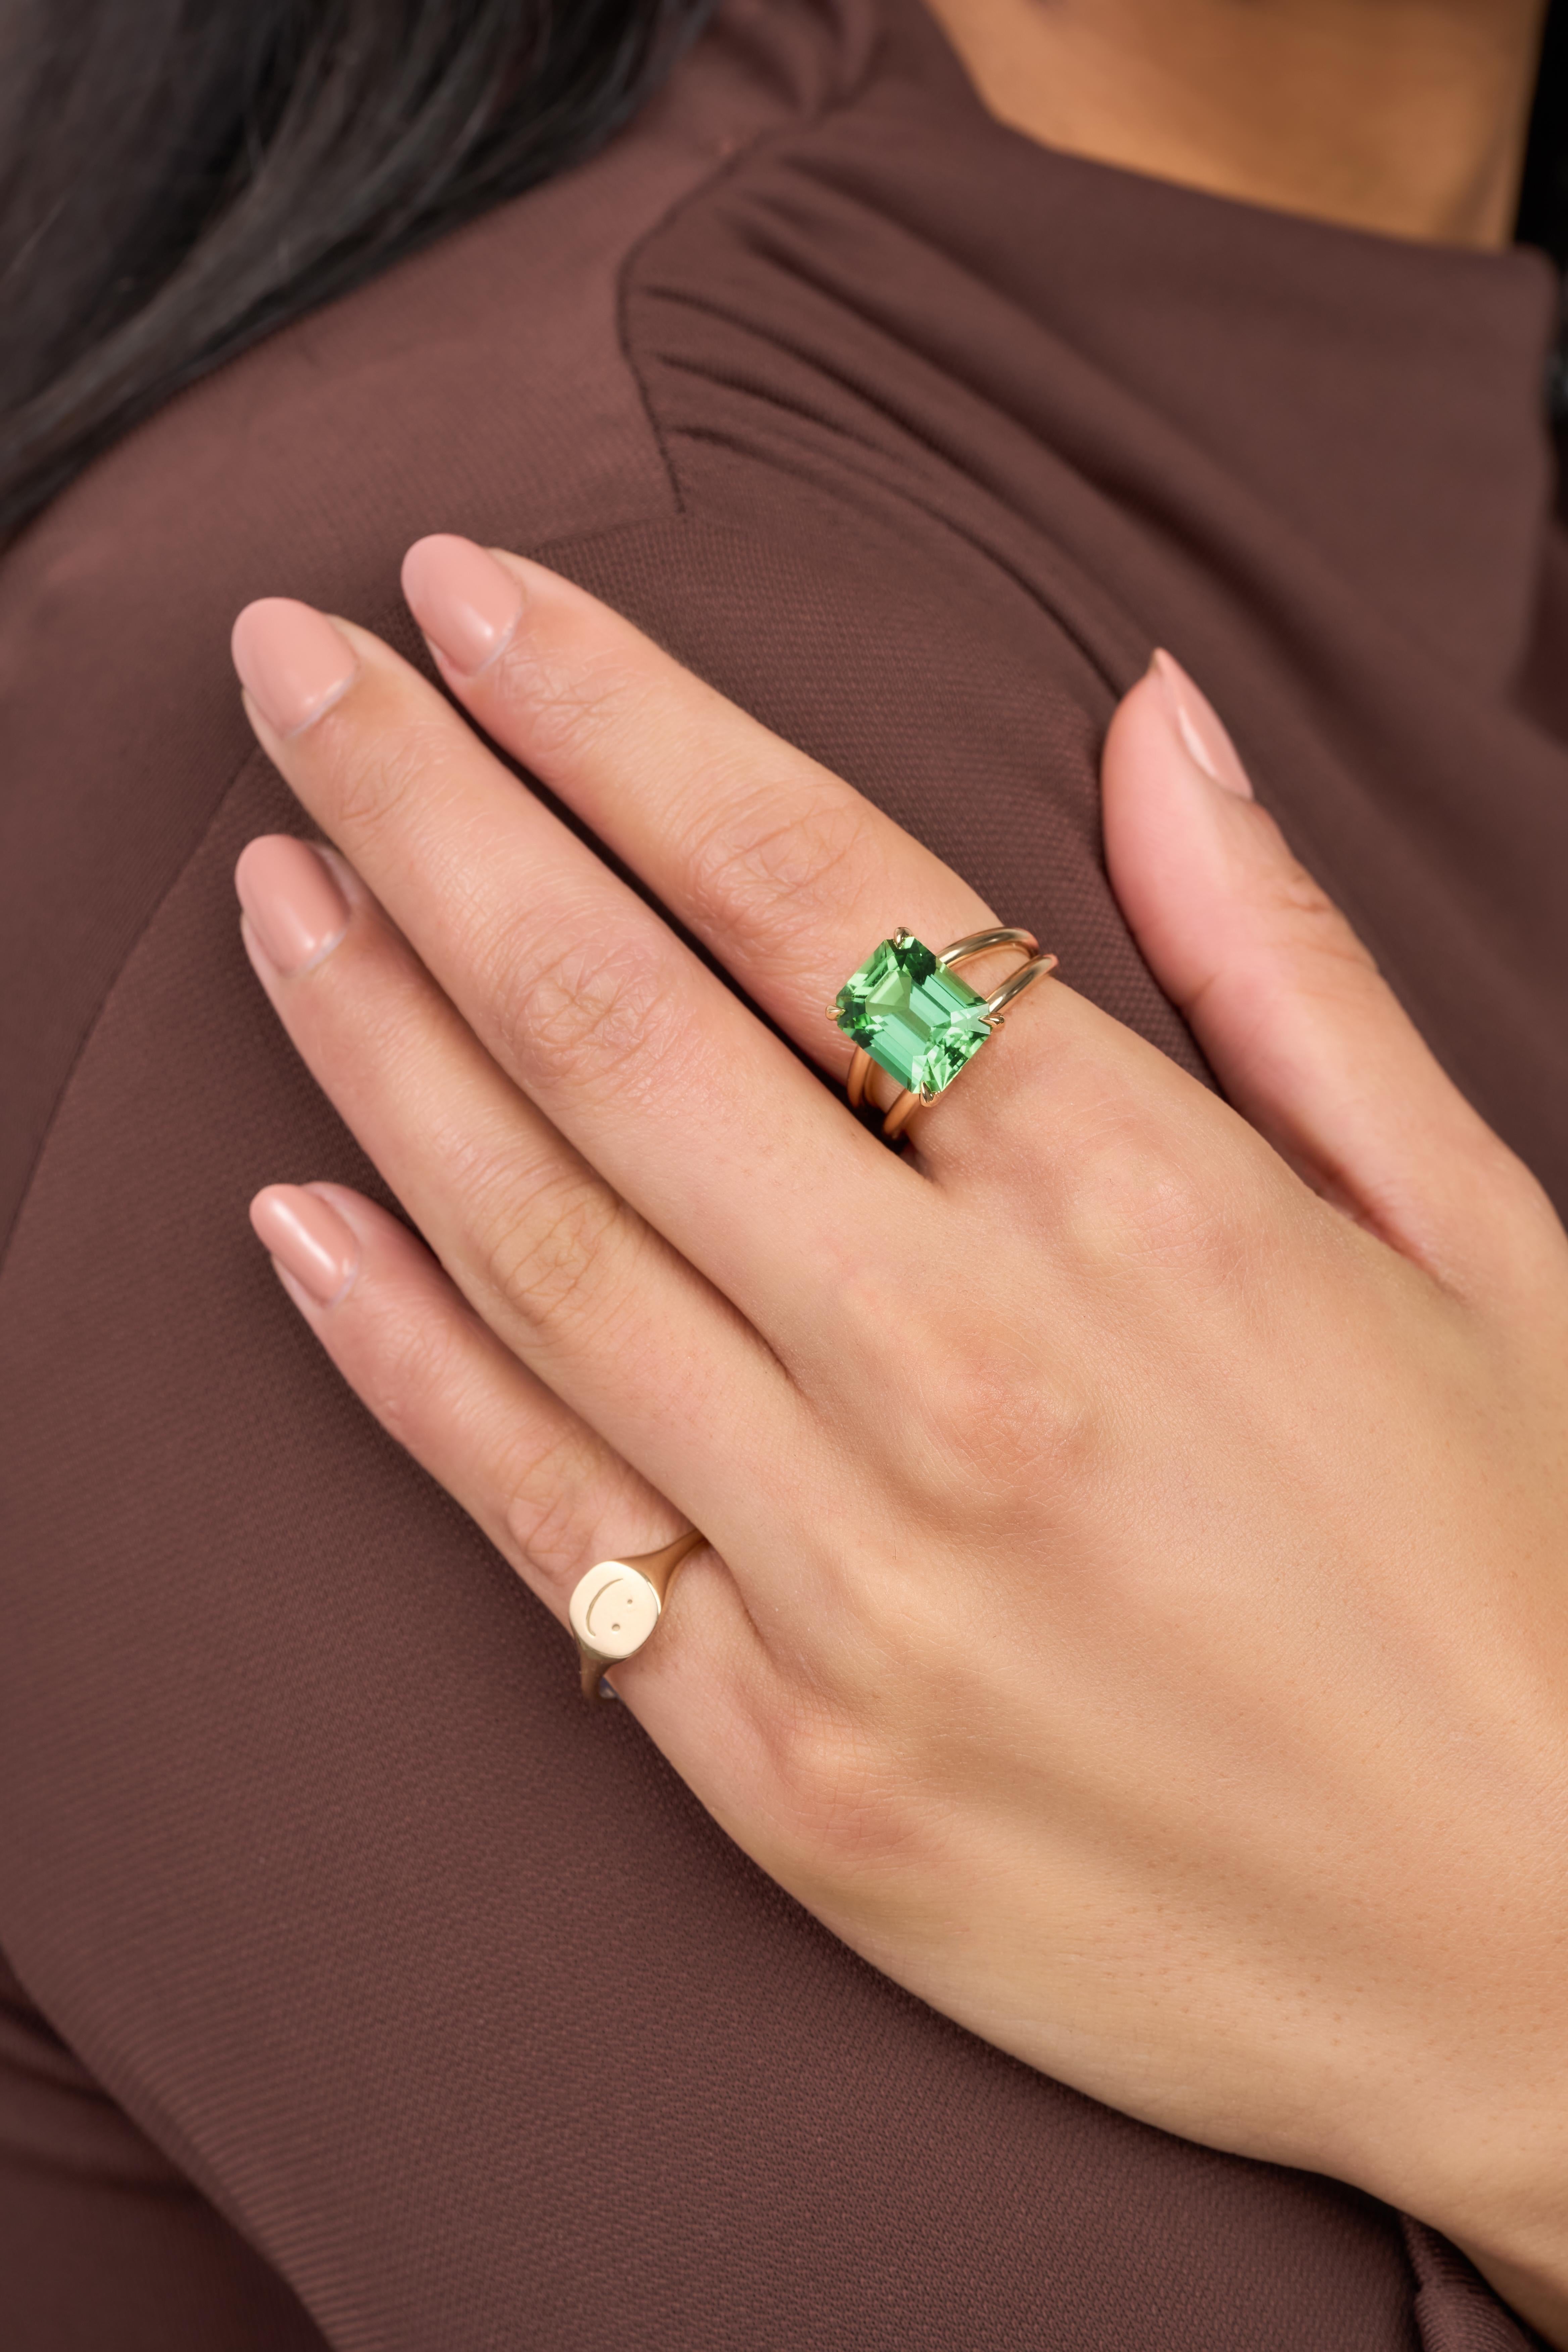 With a design that simply cannot go unnoticed, our Lagoon Tourmaline Cocktail Ring is where a 5-carat neon green tourmaline finds its soulmate in in solid yellow gold. Part of our signature cocktail collection, this ring hugs the finger it adorns